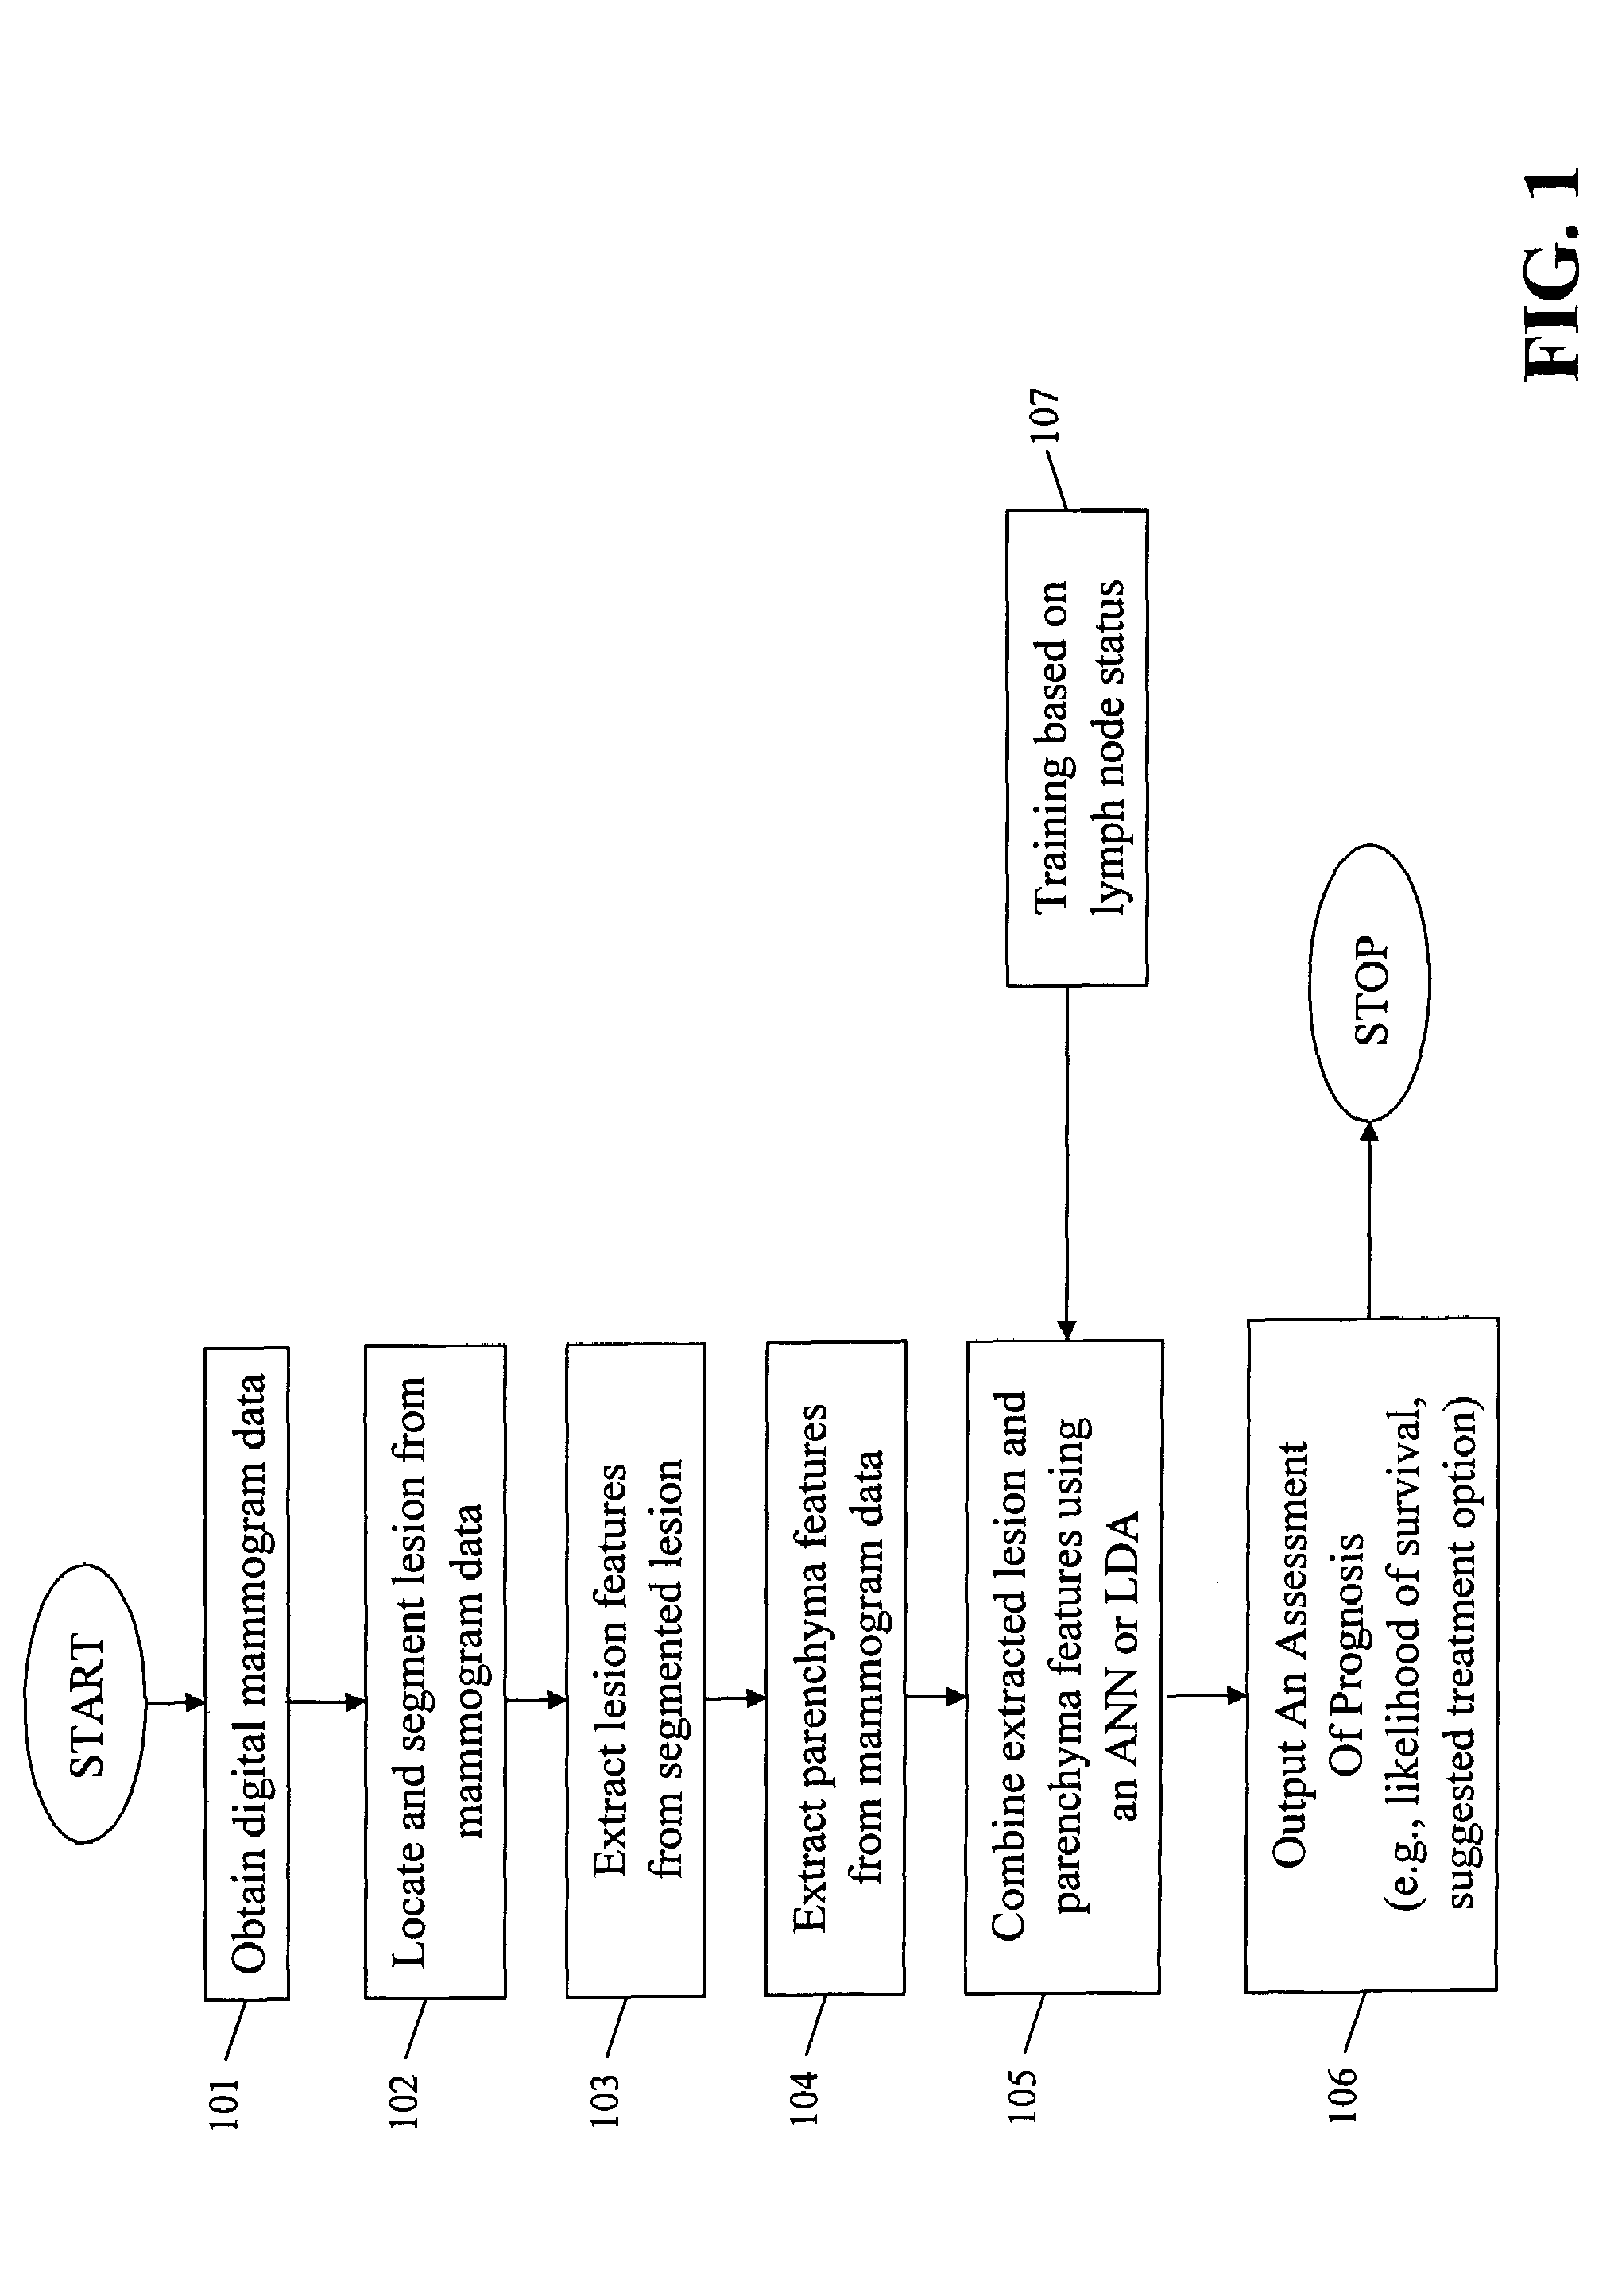 Automated method and system for computerized image analysis for prognosis